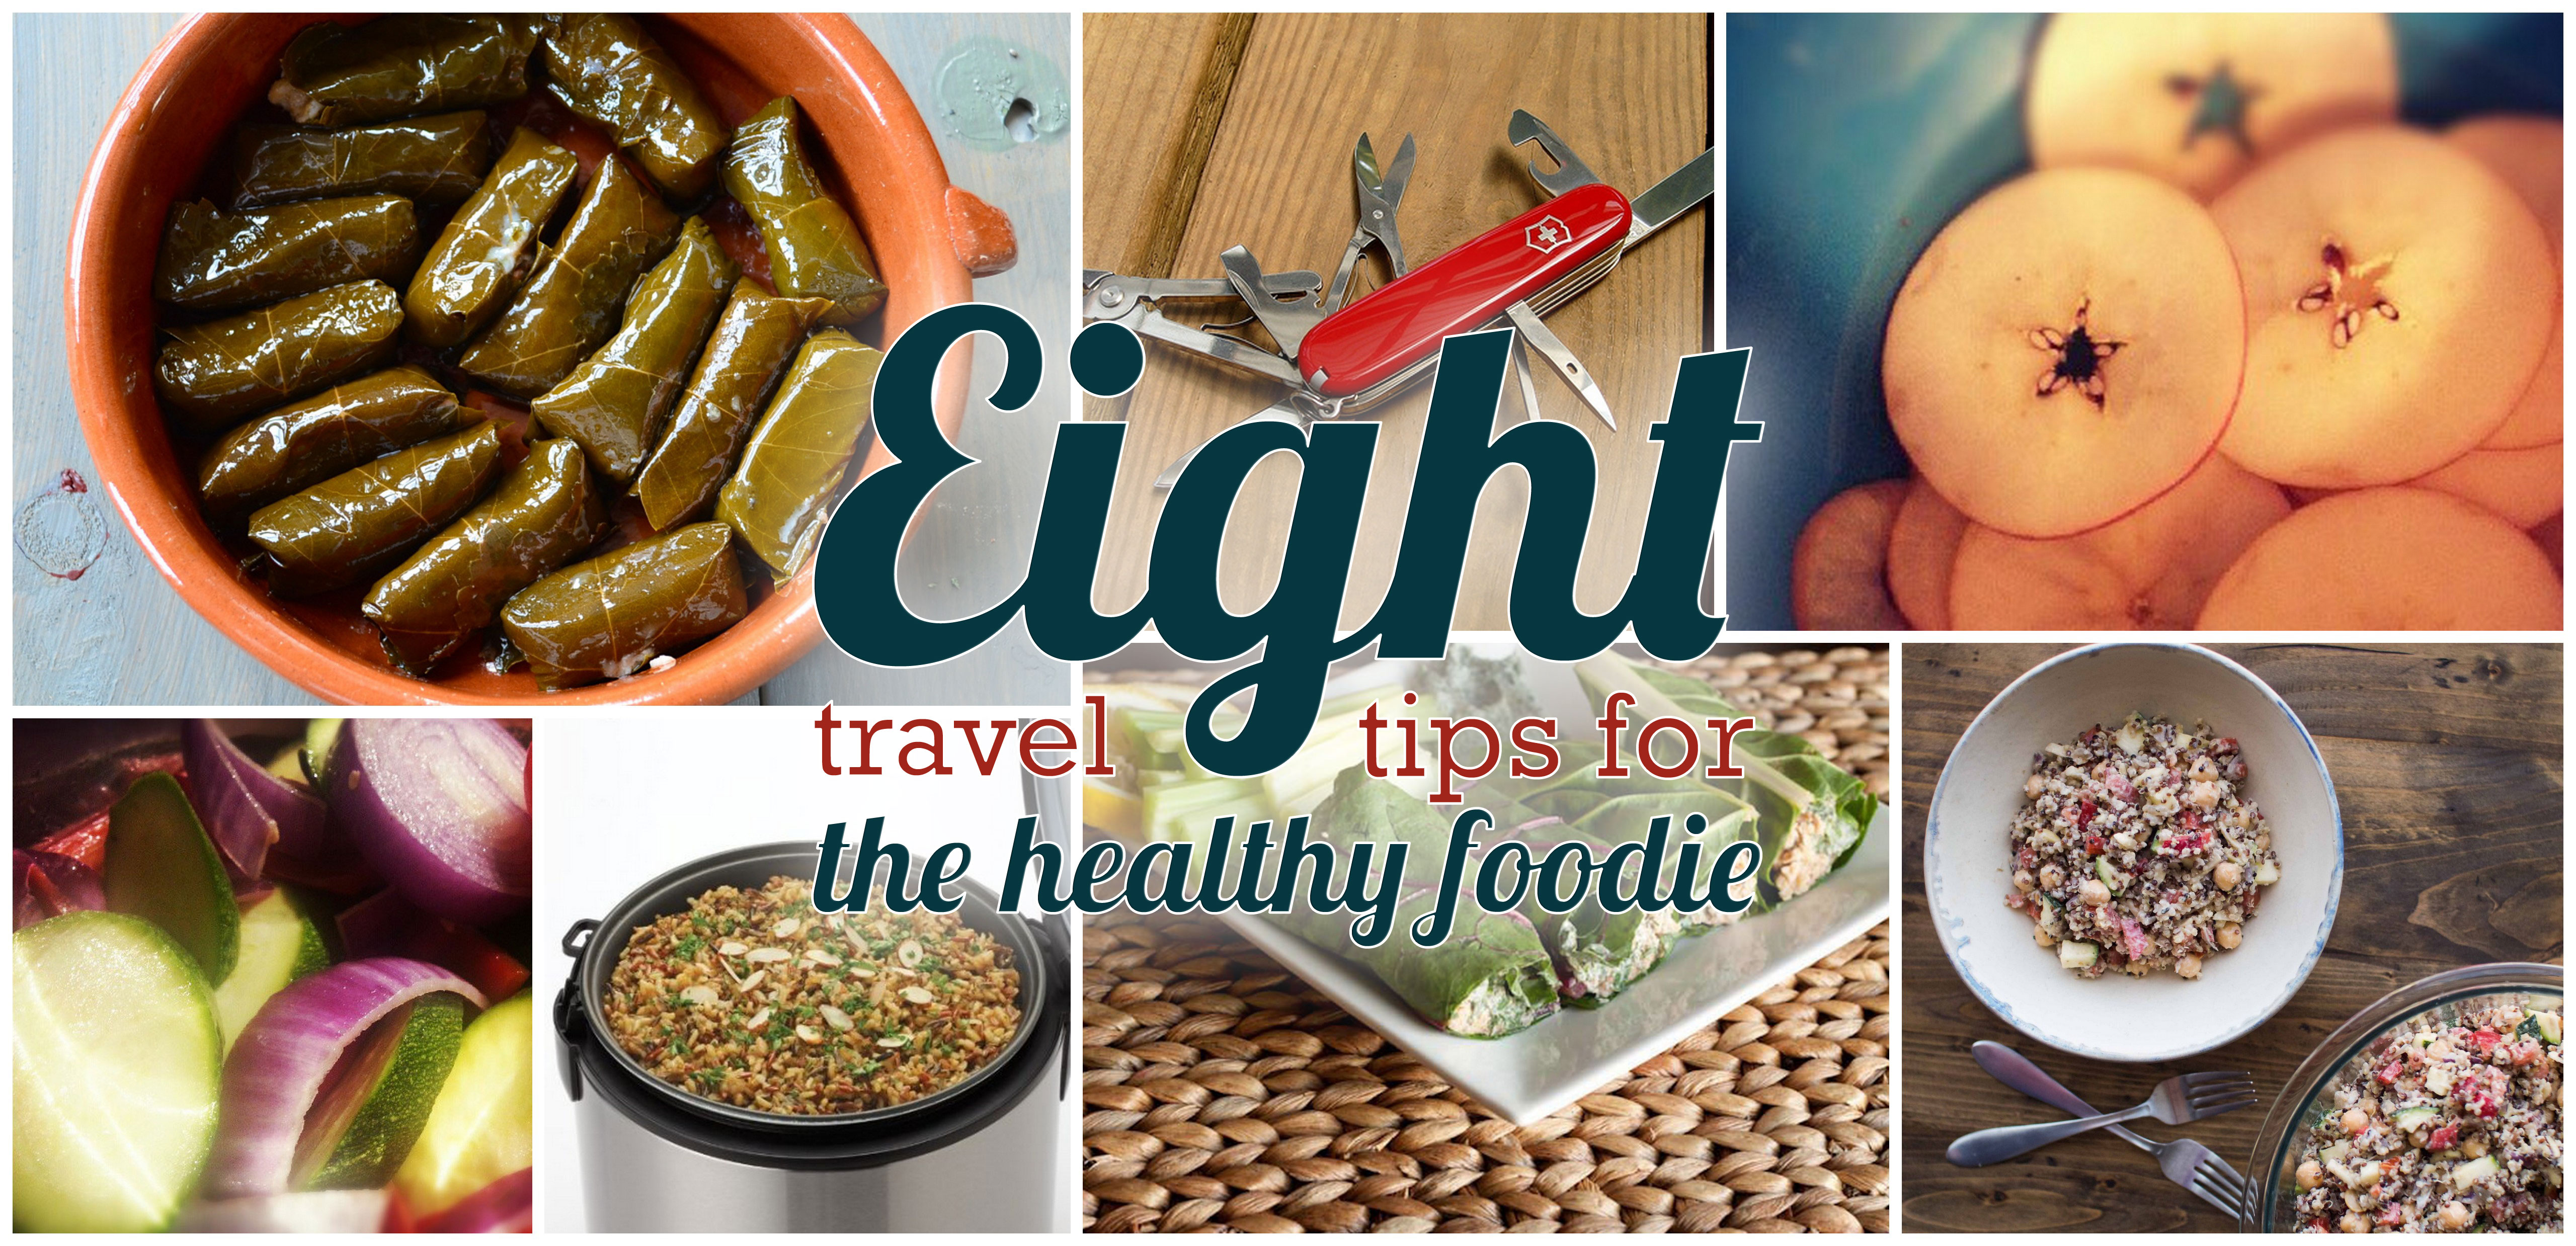 8 Travel Tips for the Healthy Foodie - Road Trip Menu Planning - This